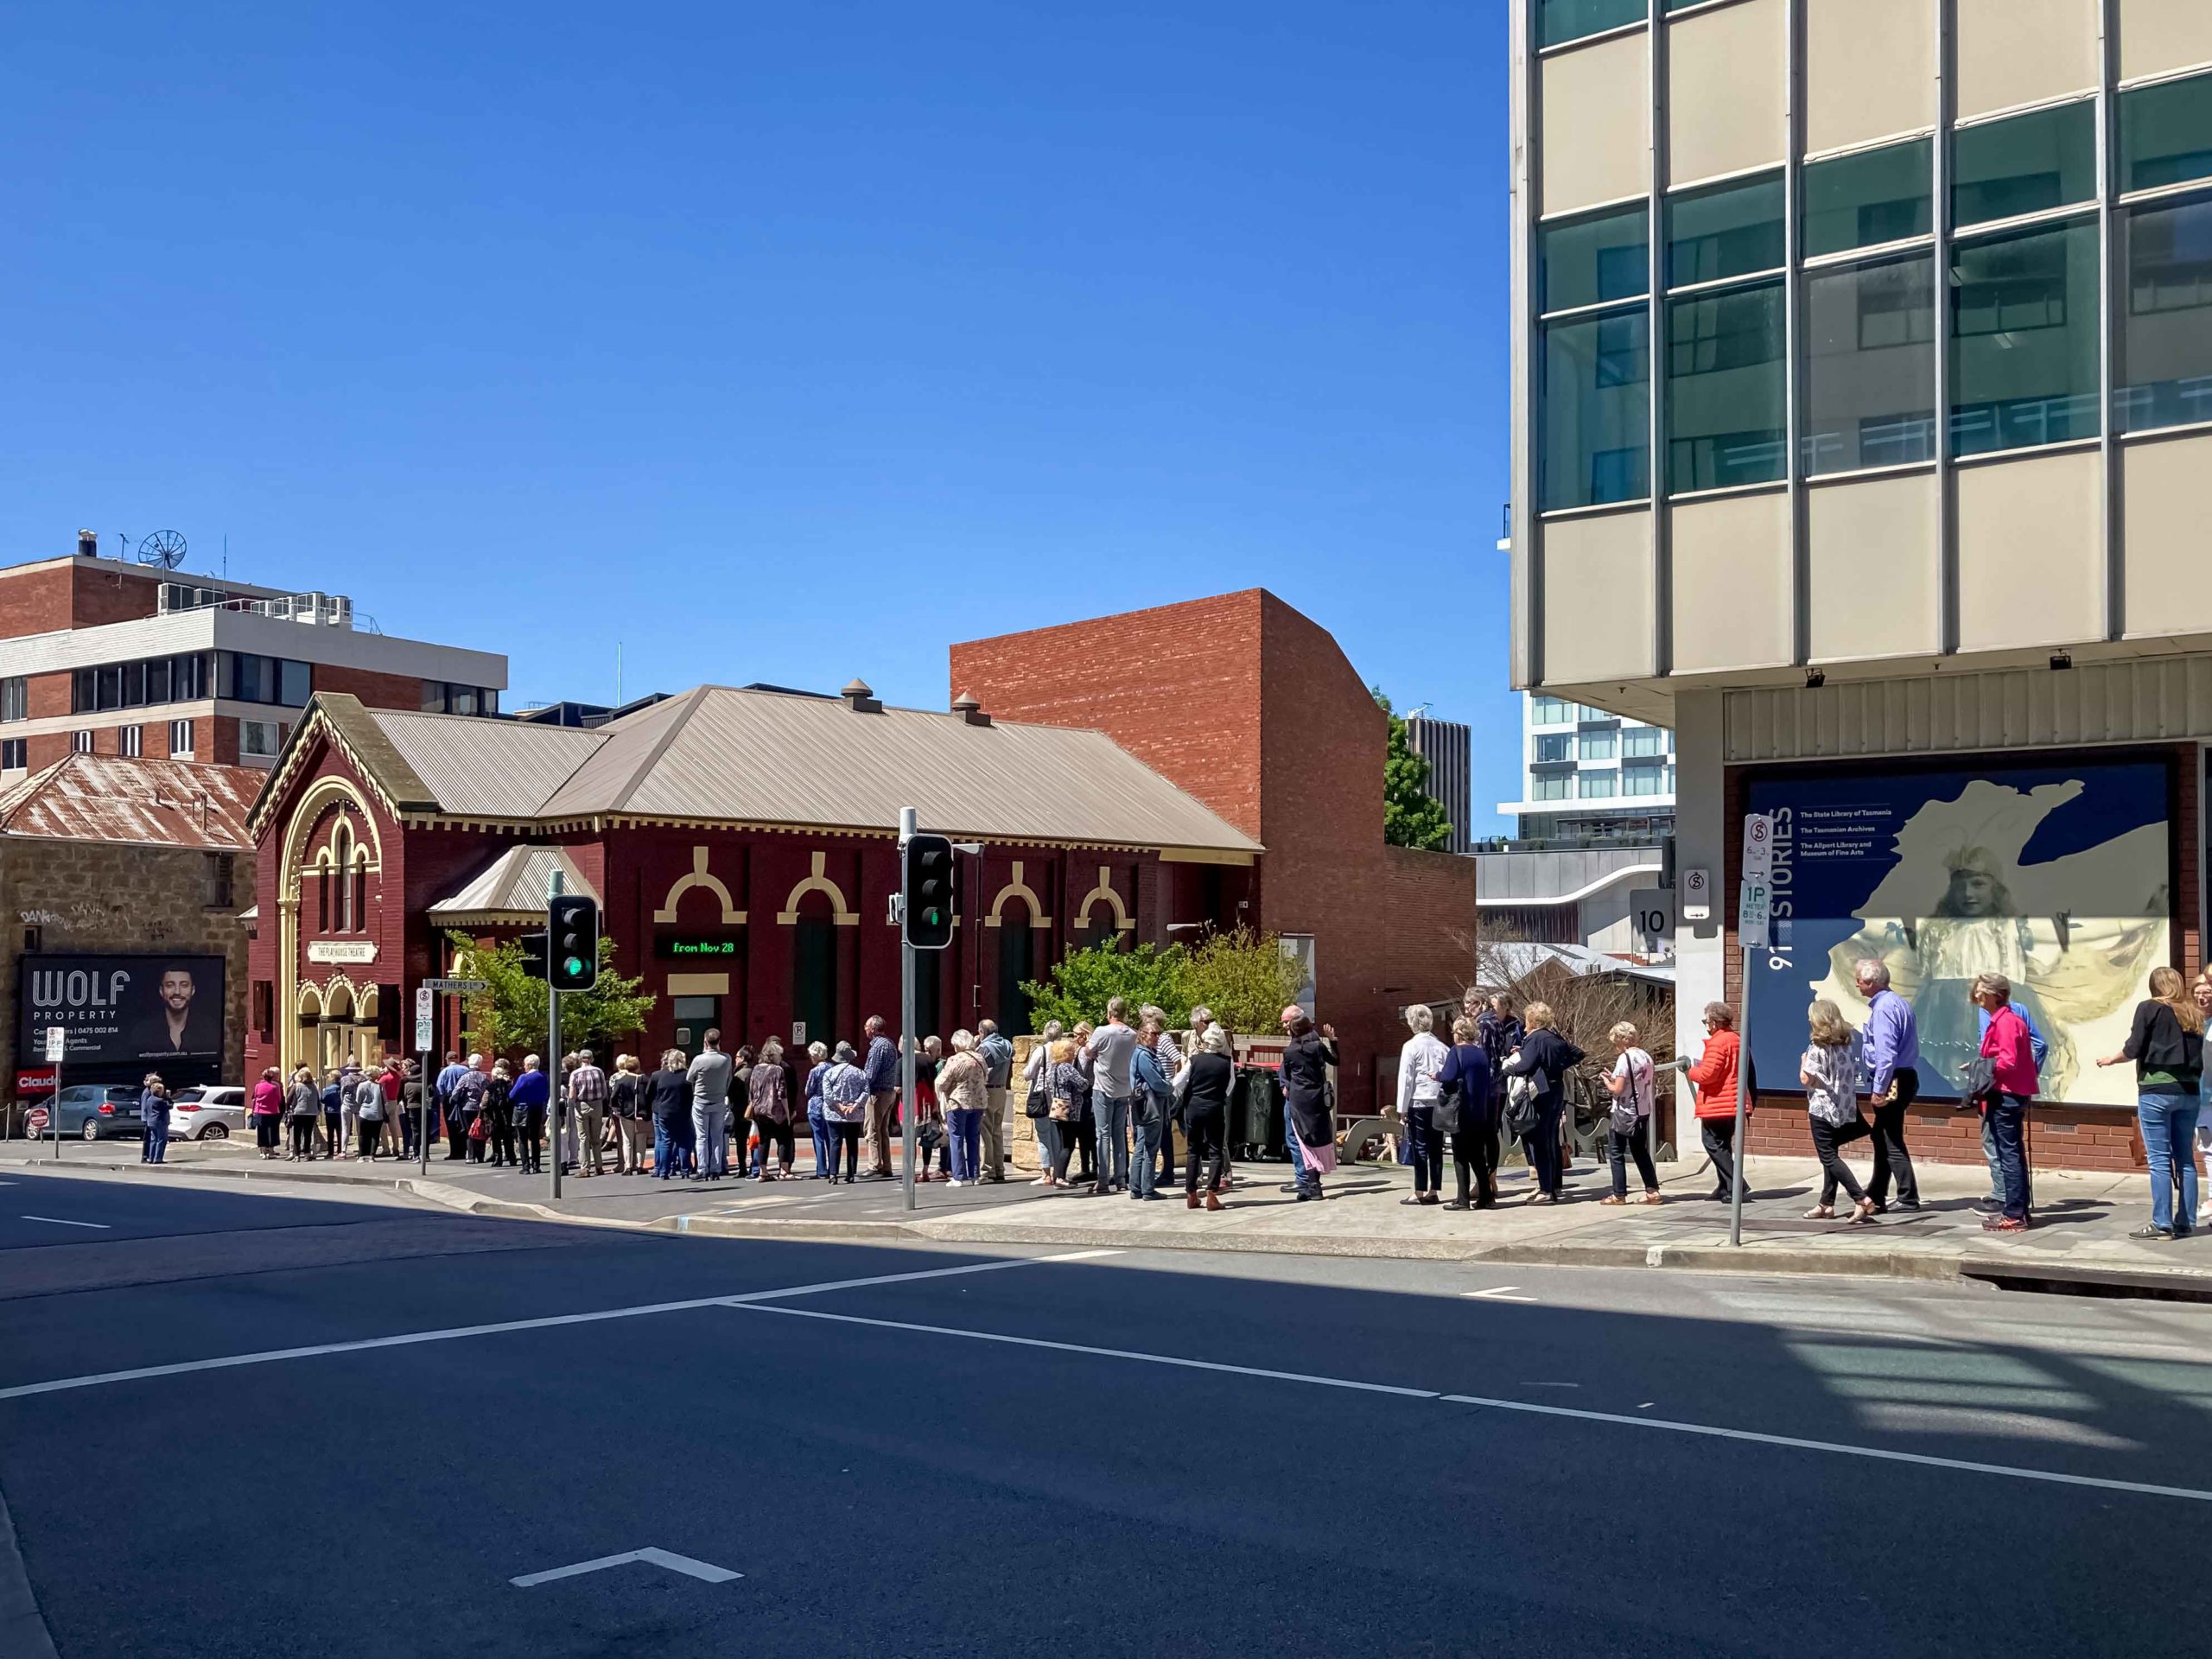 A line of people standing outside a dark red building called Playhouse Theatre